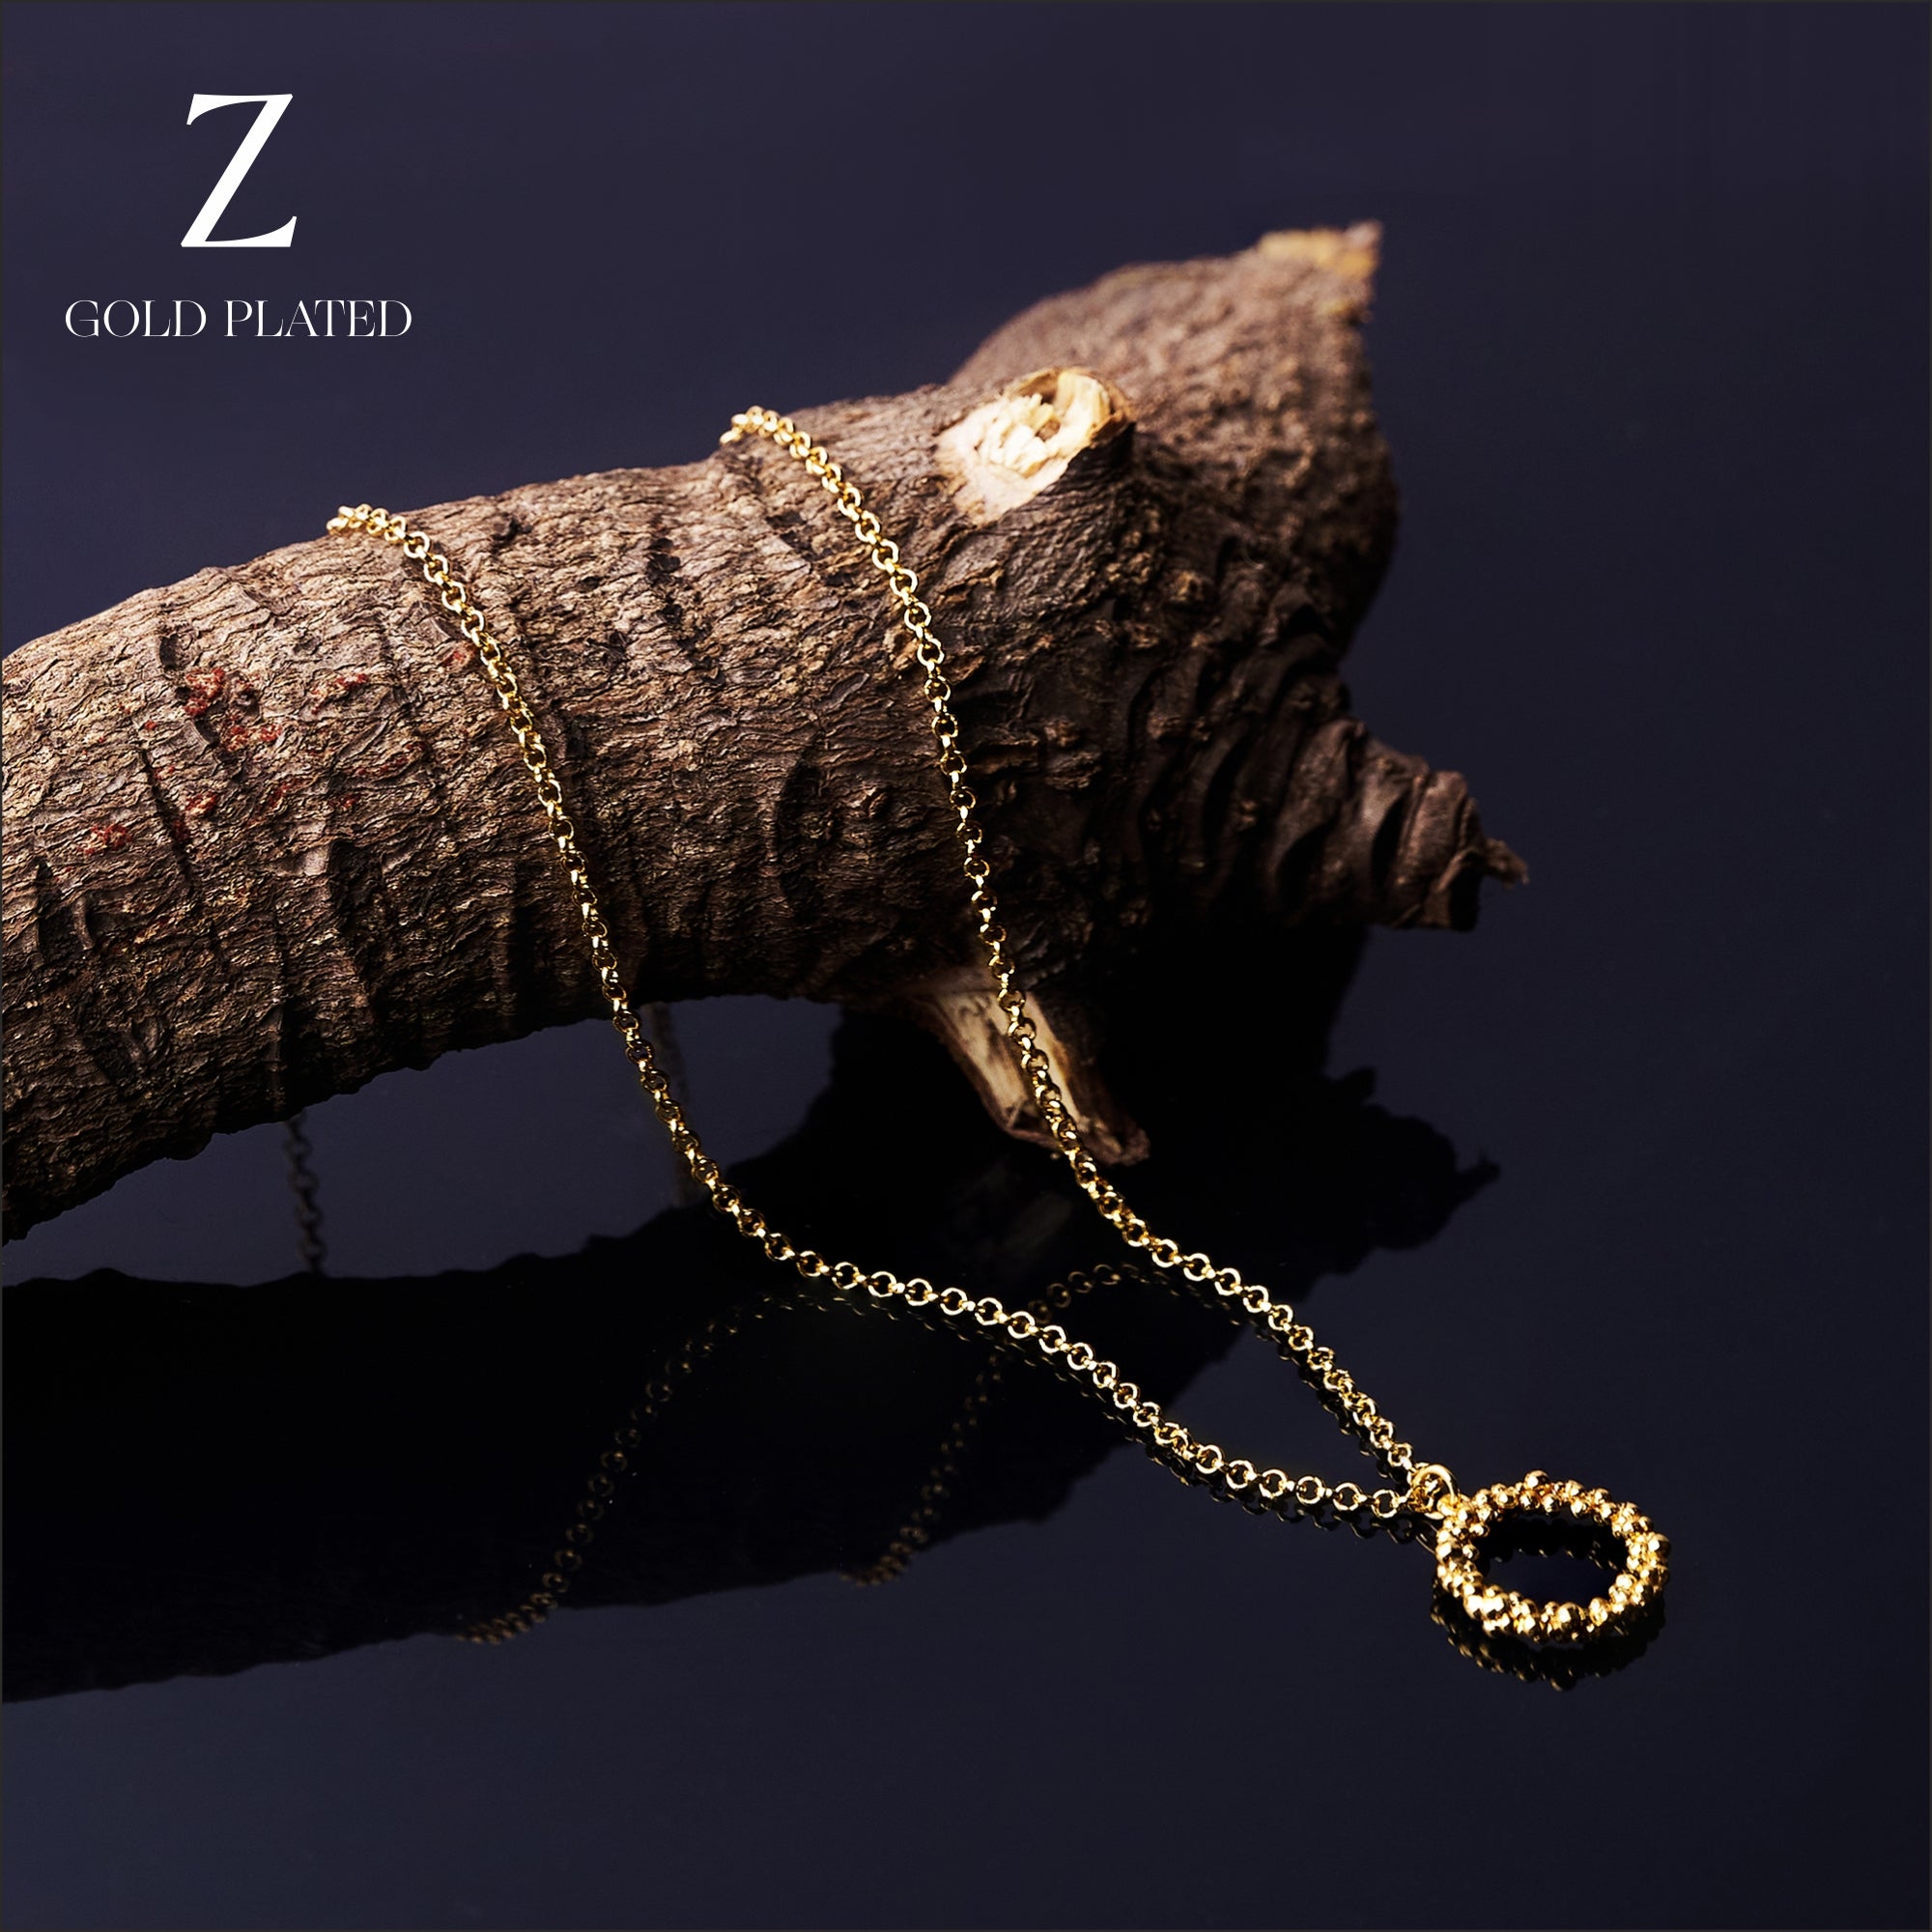 Real Gold Plated Z Bobble Circle Pendant Necklace